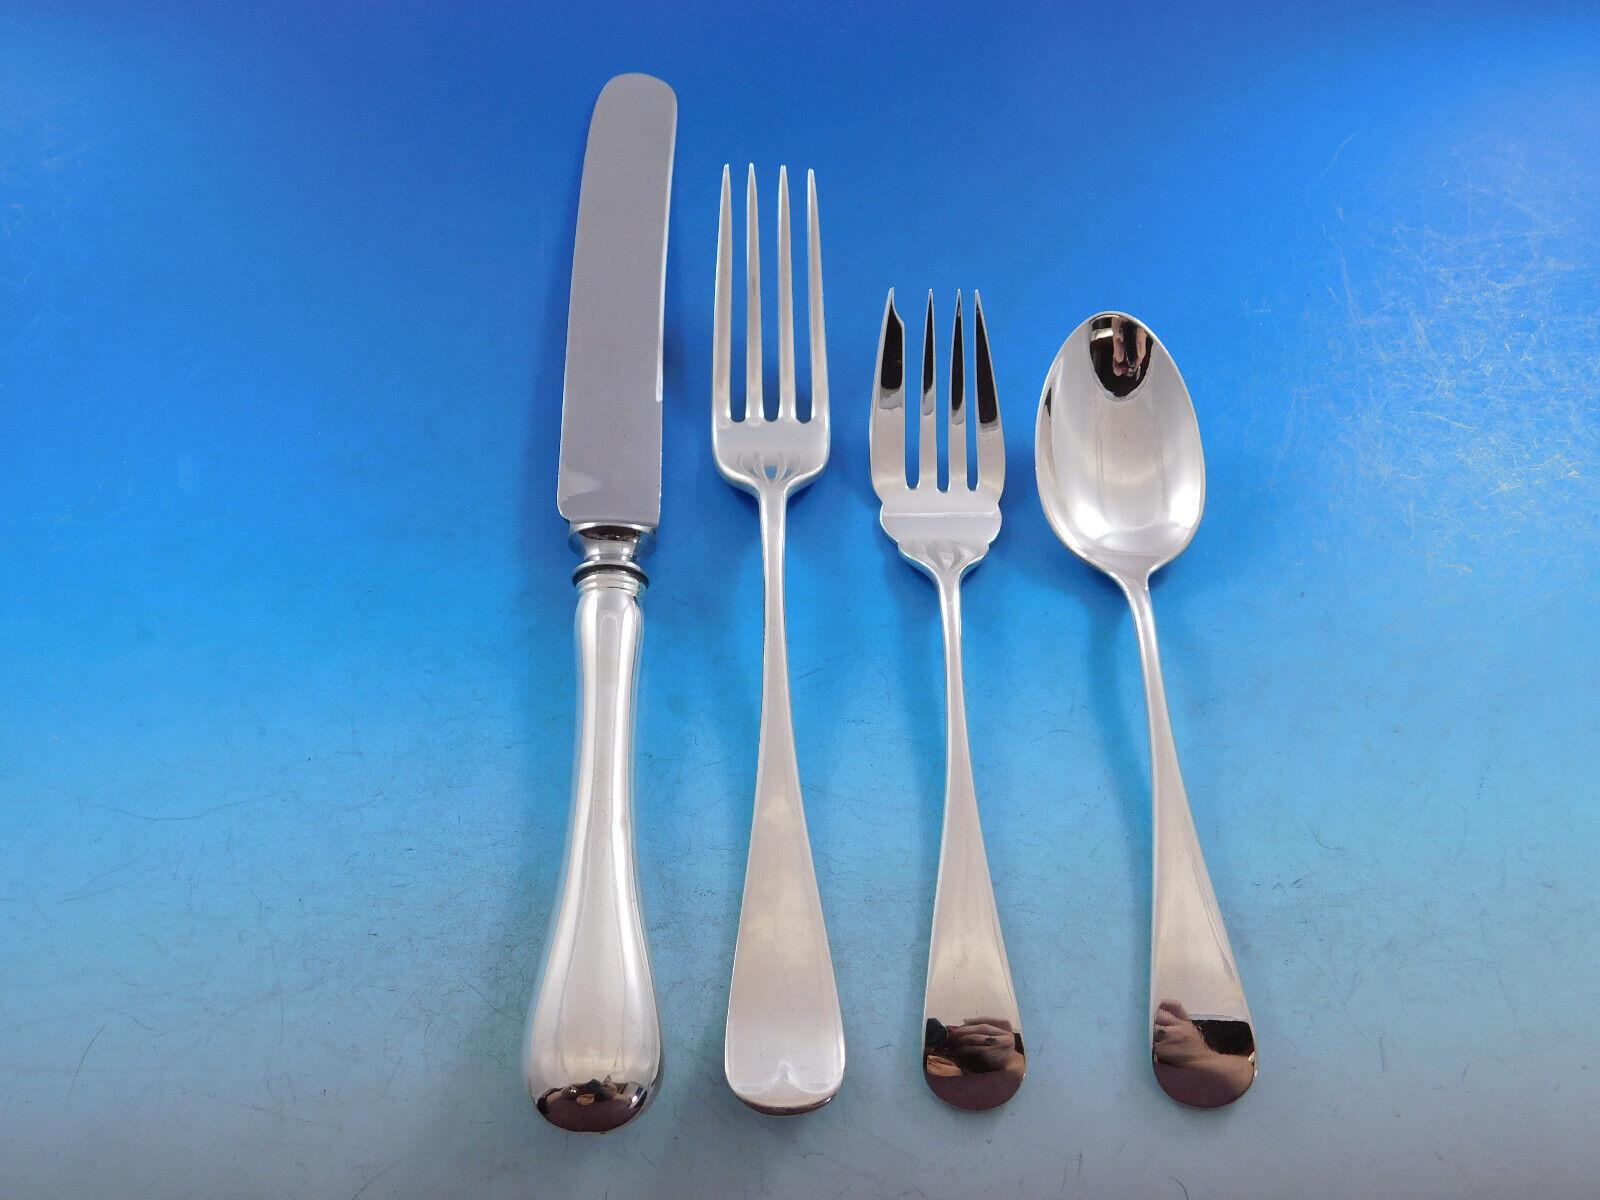 Gorgeous Old English by Birks (Canada) sterling silver Flatware set - 98 Pieces. This timeless unadorned pattern was introduced in the year 1914. This set includes:

8 Dinner Size Knives, 9 3/4